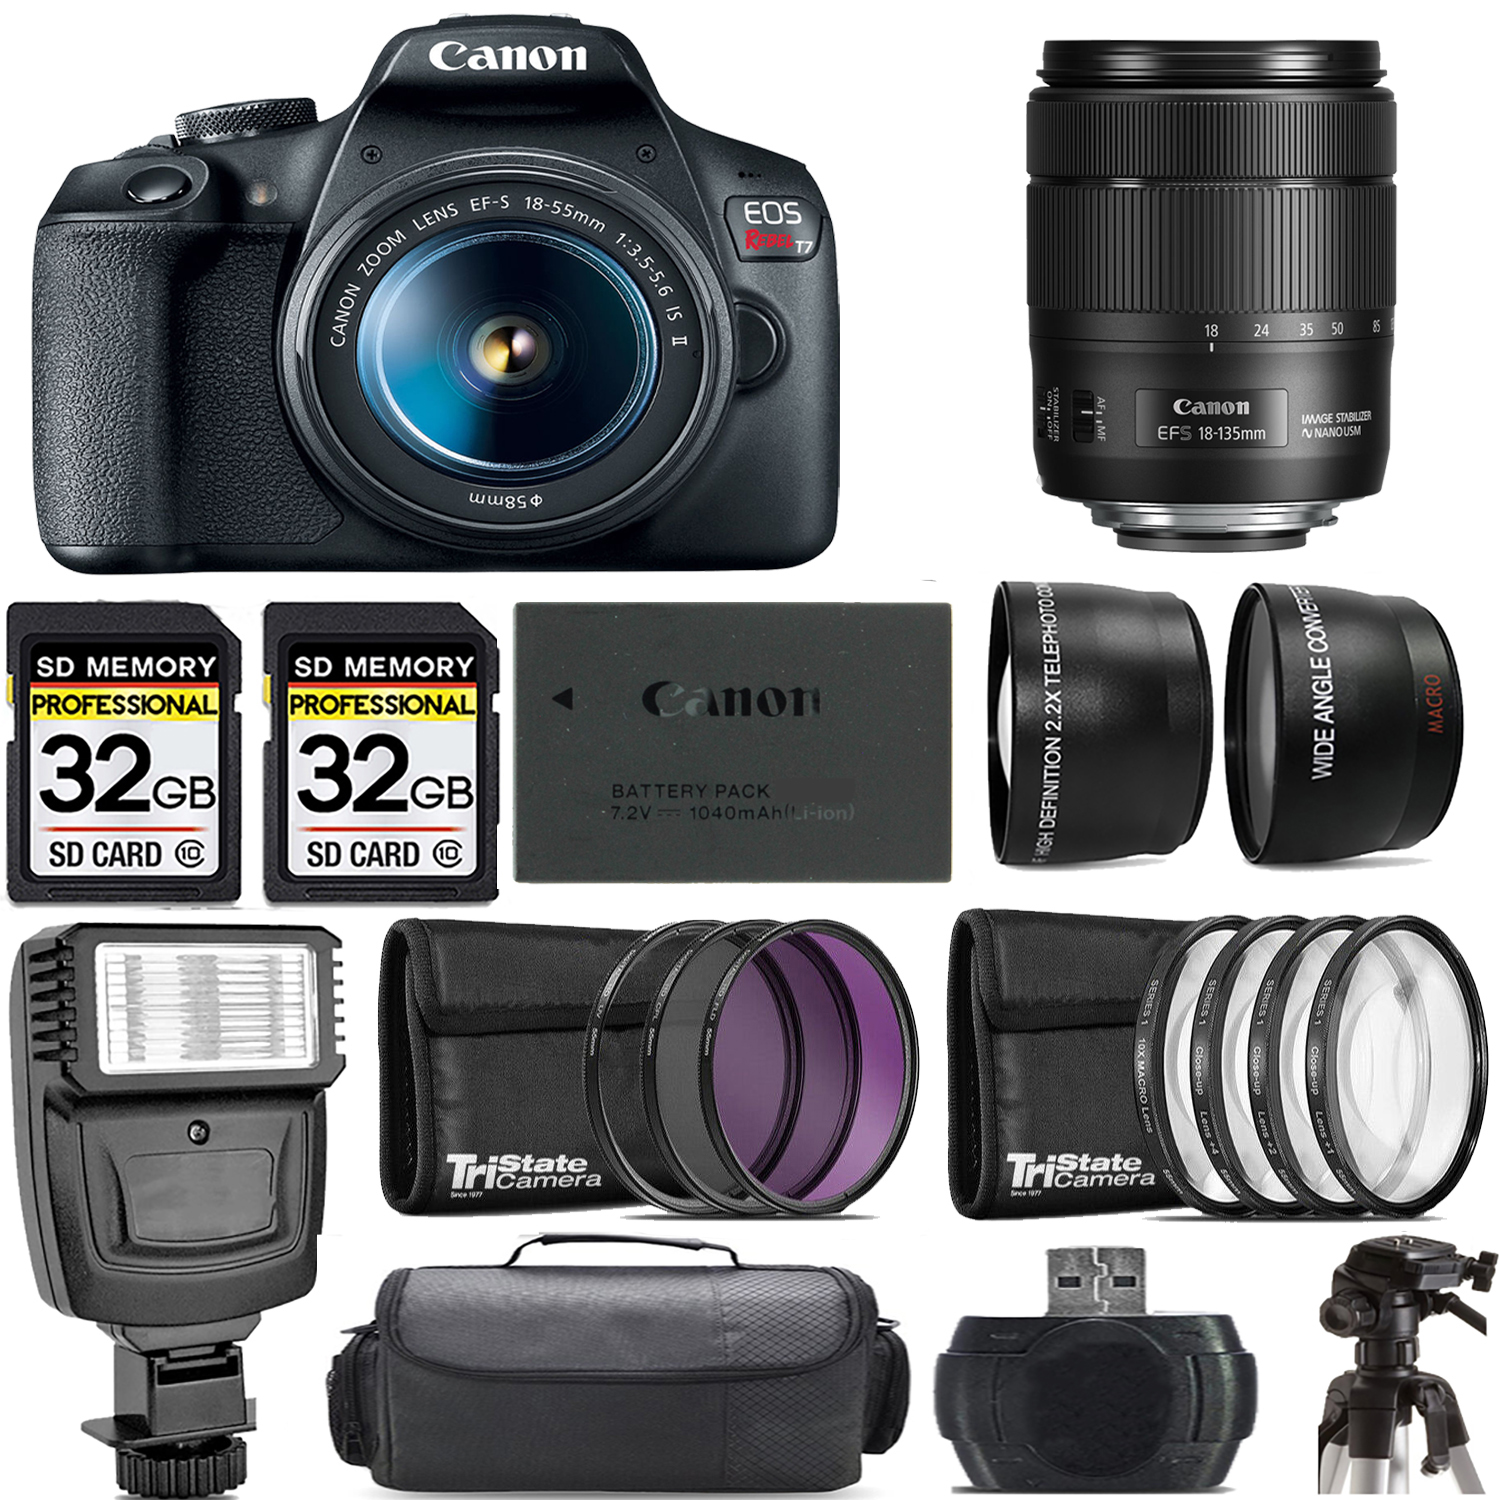 EOS Rebel T7 with 18-55mm Lens + 18-135mm f/3.5-5.6 IS USM Lens + Flash - Kit *FREE SHIPPING*